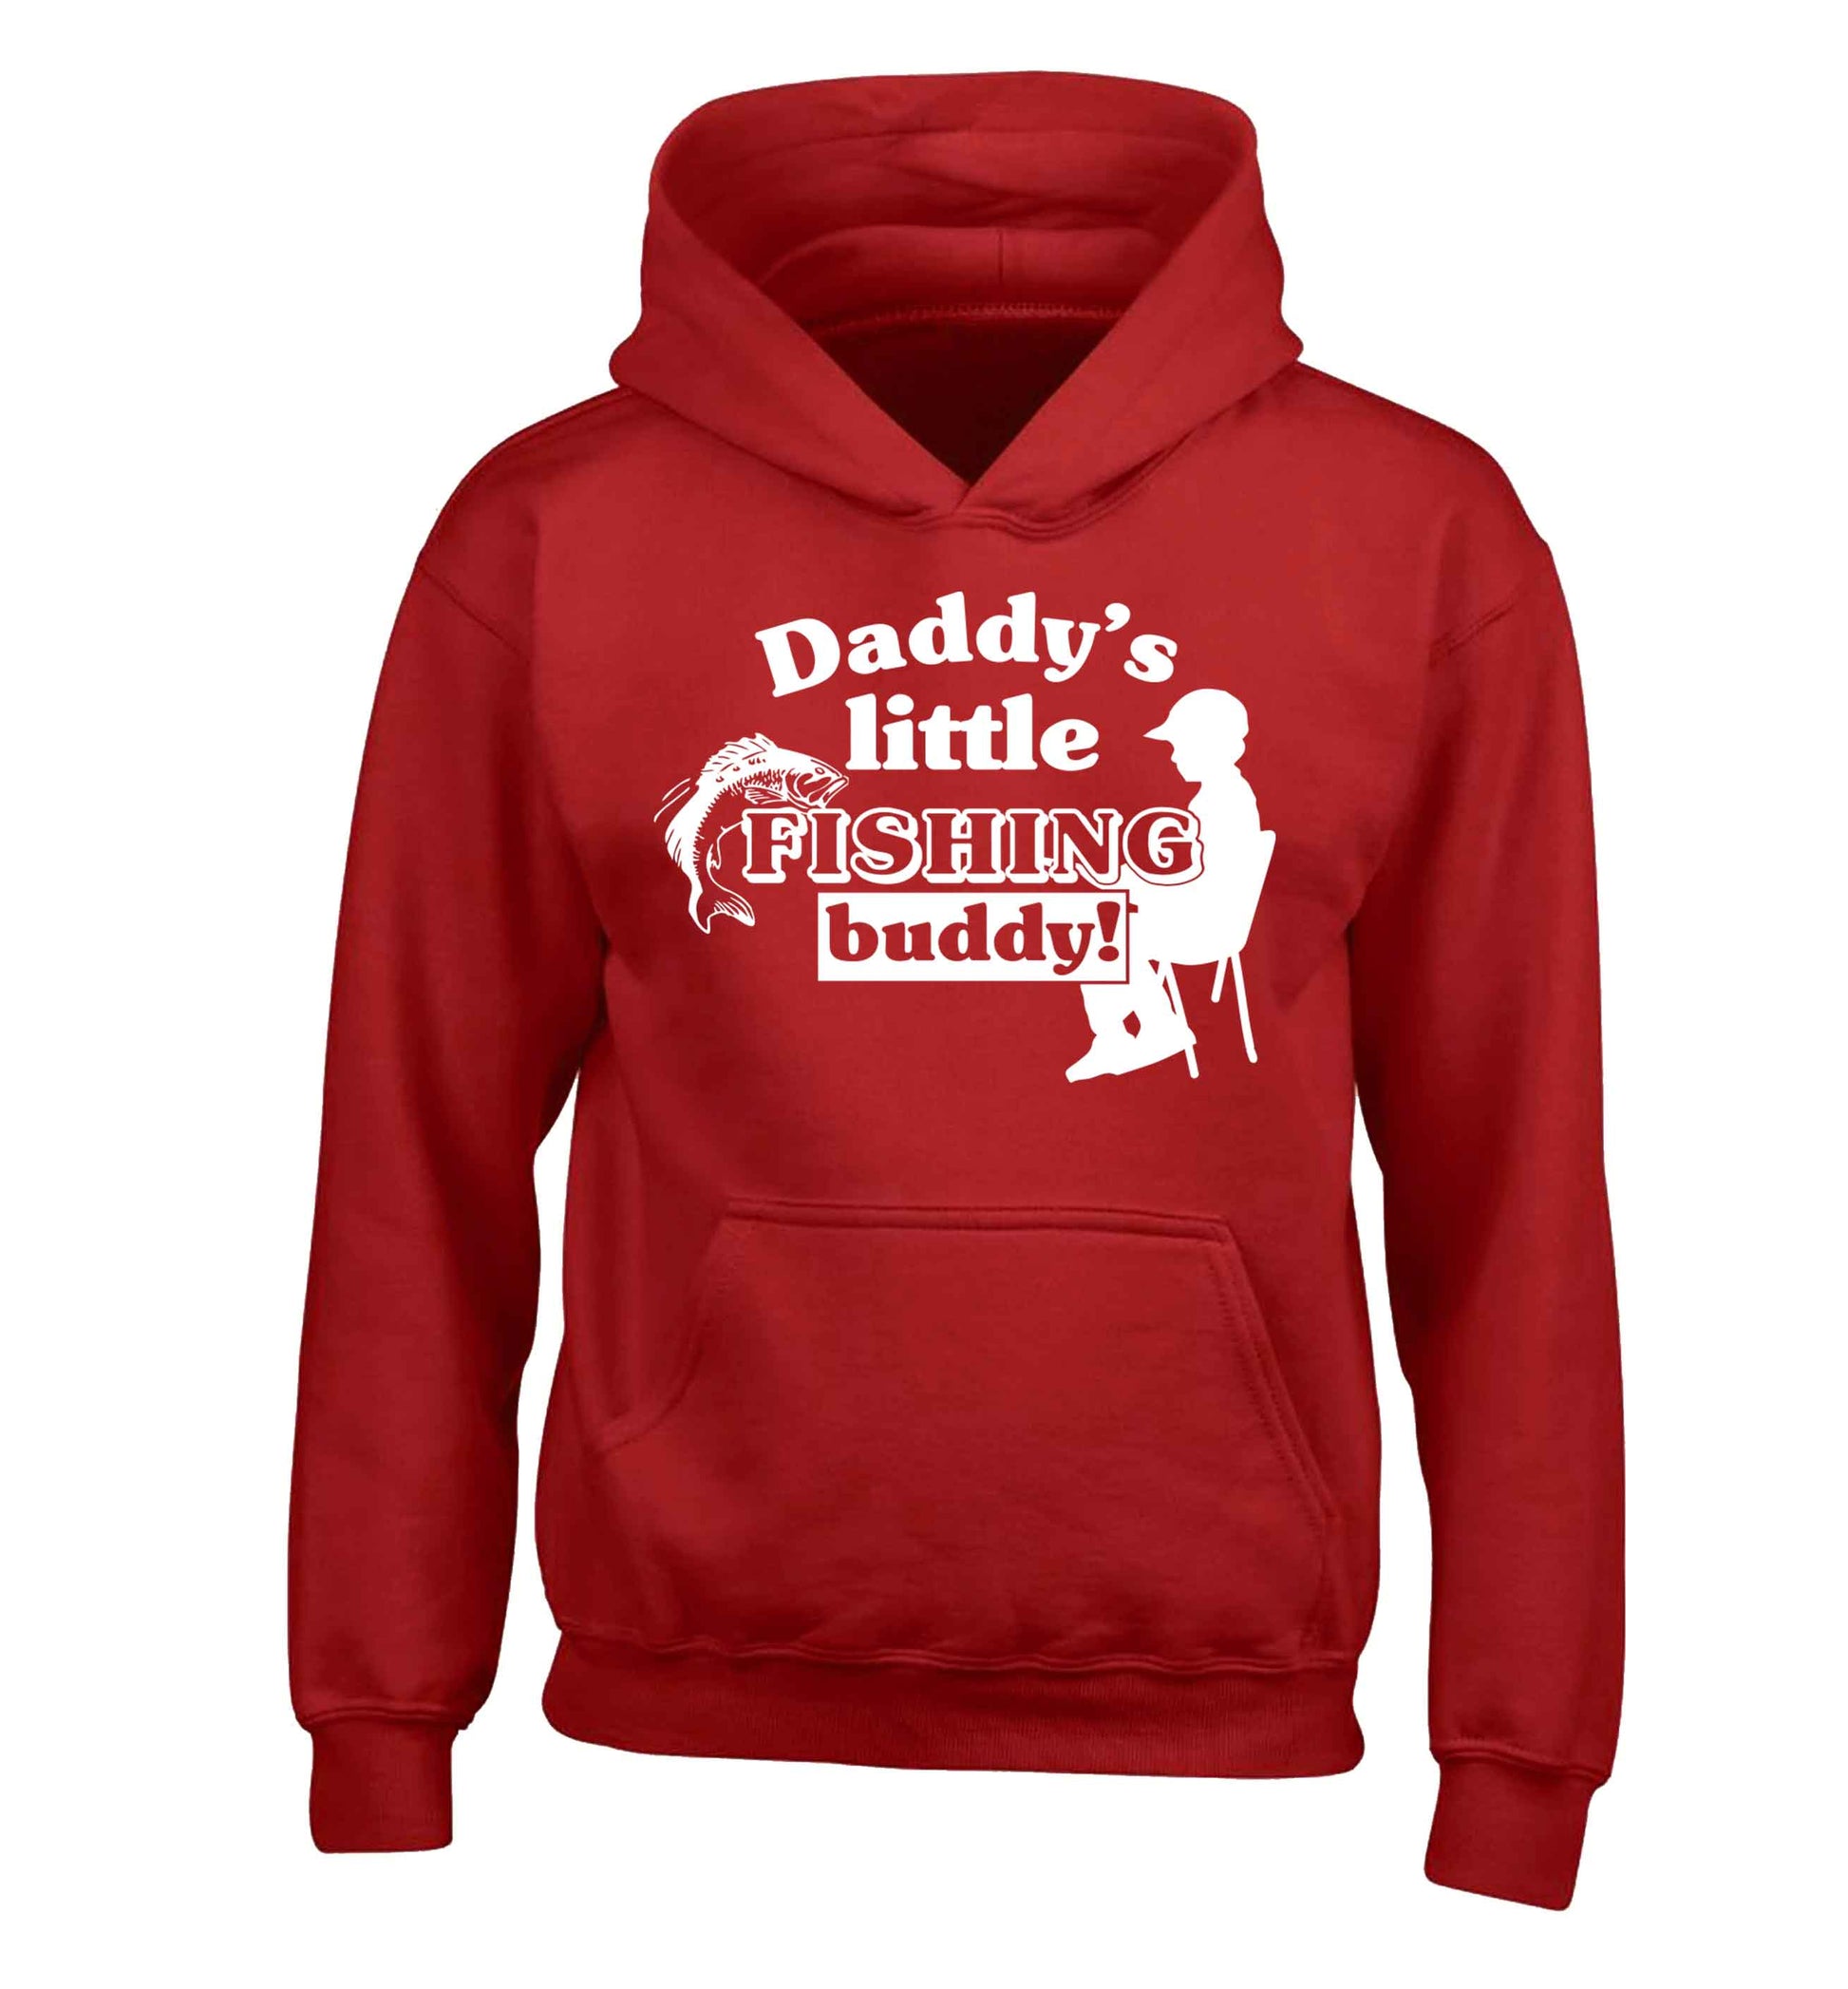 Daddy's little fishing buddy children's red hoodie 12-13 Years